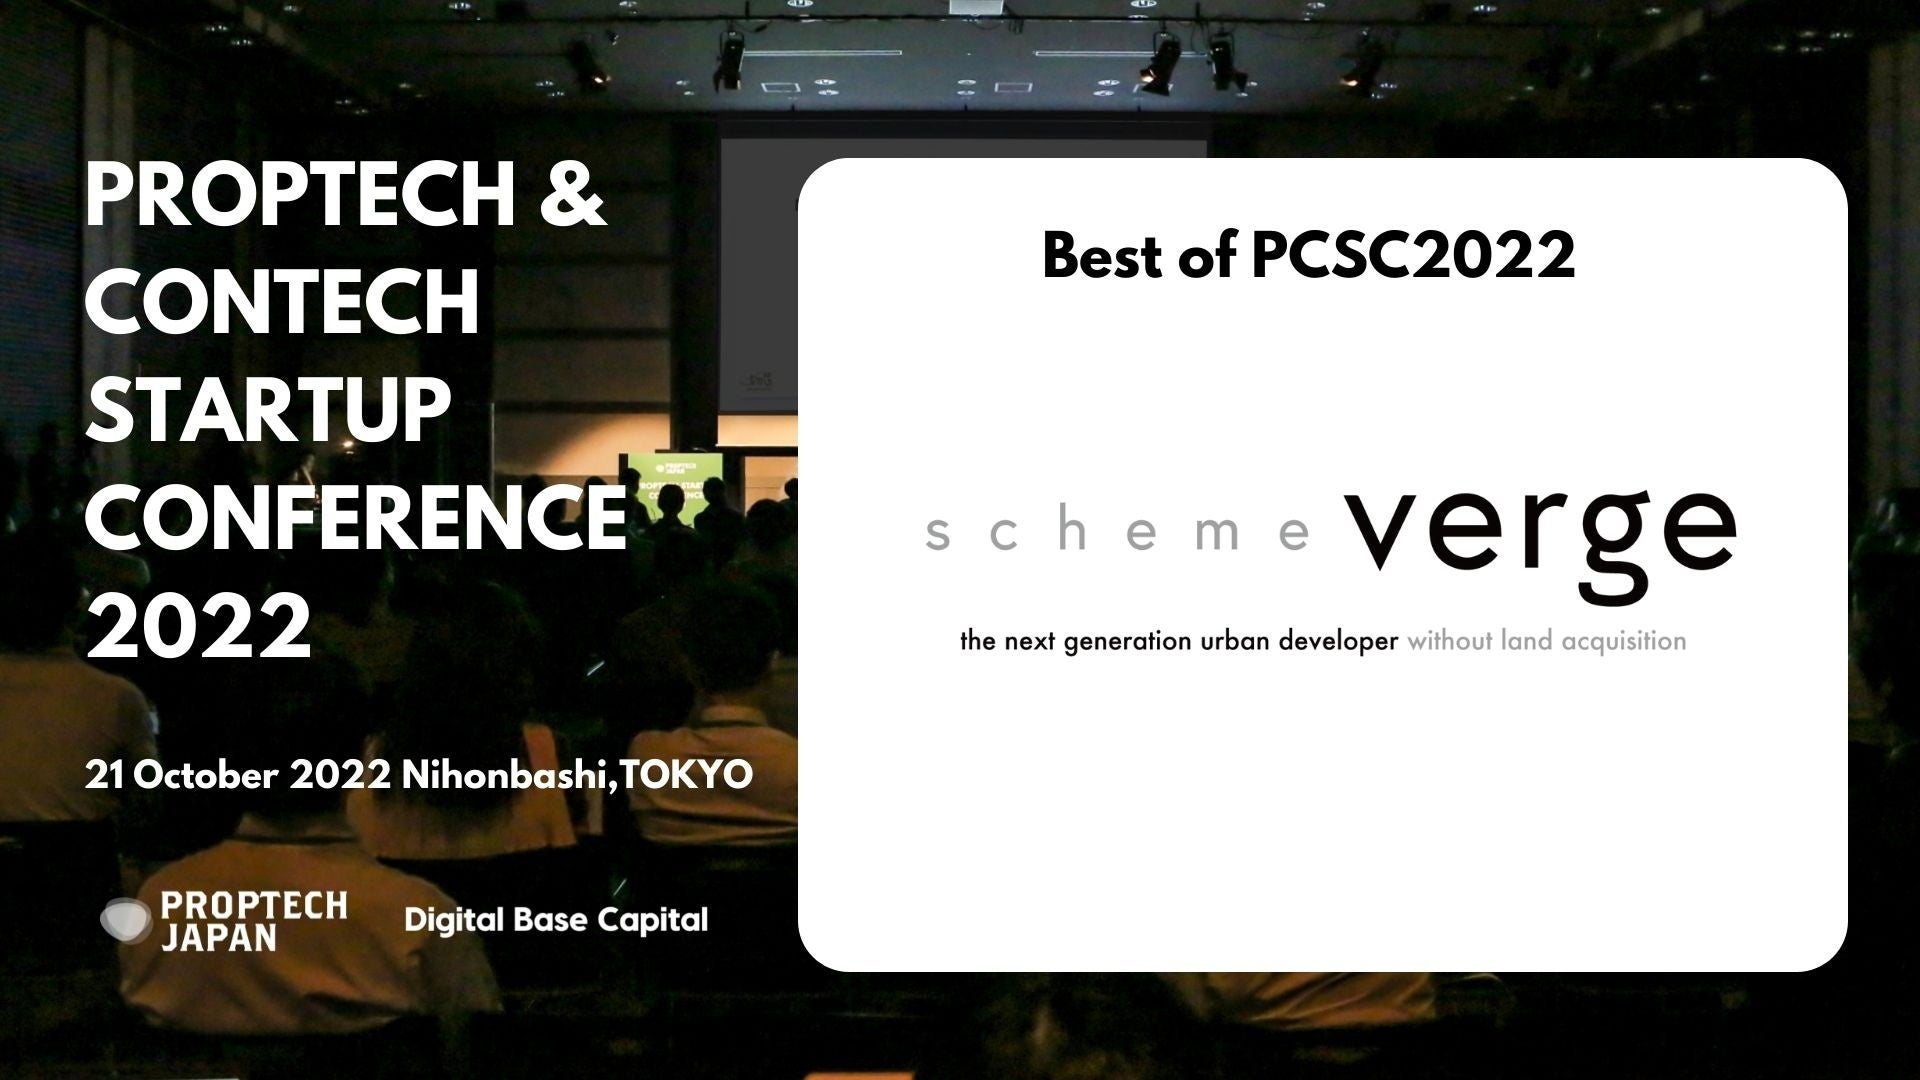 scheme verge、不動産＆建設DXのアジア最大級イベント『PropTech & ConTech Startup Conference 2022』にて「Best of PCSC 2022」を受賞のサブ画像1